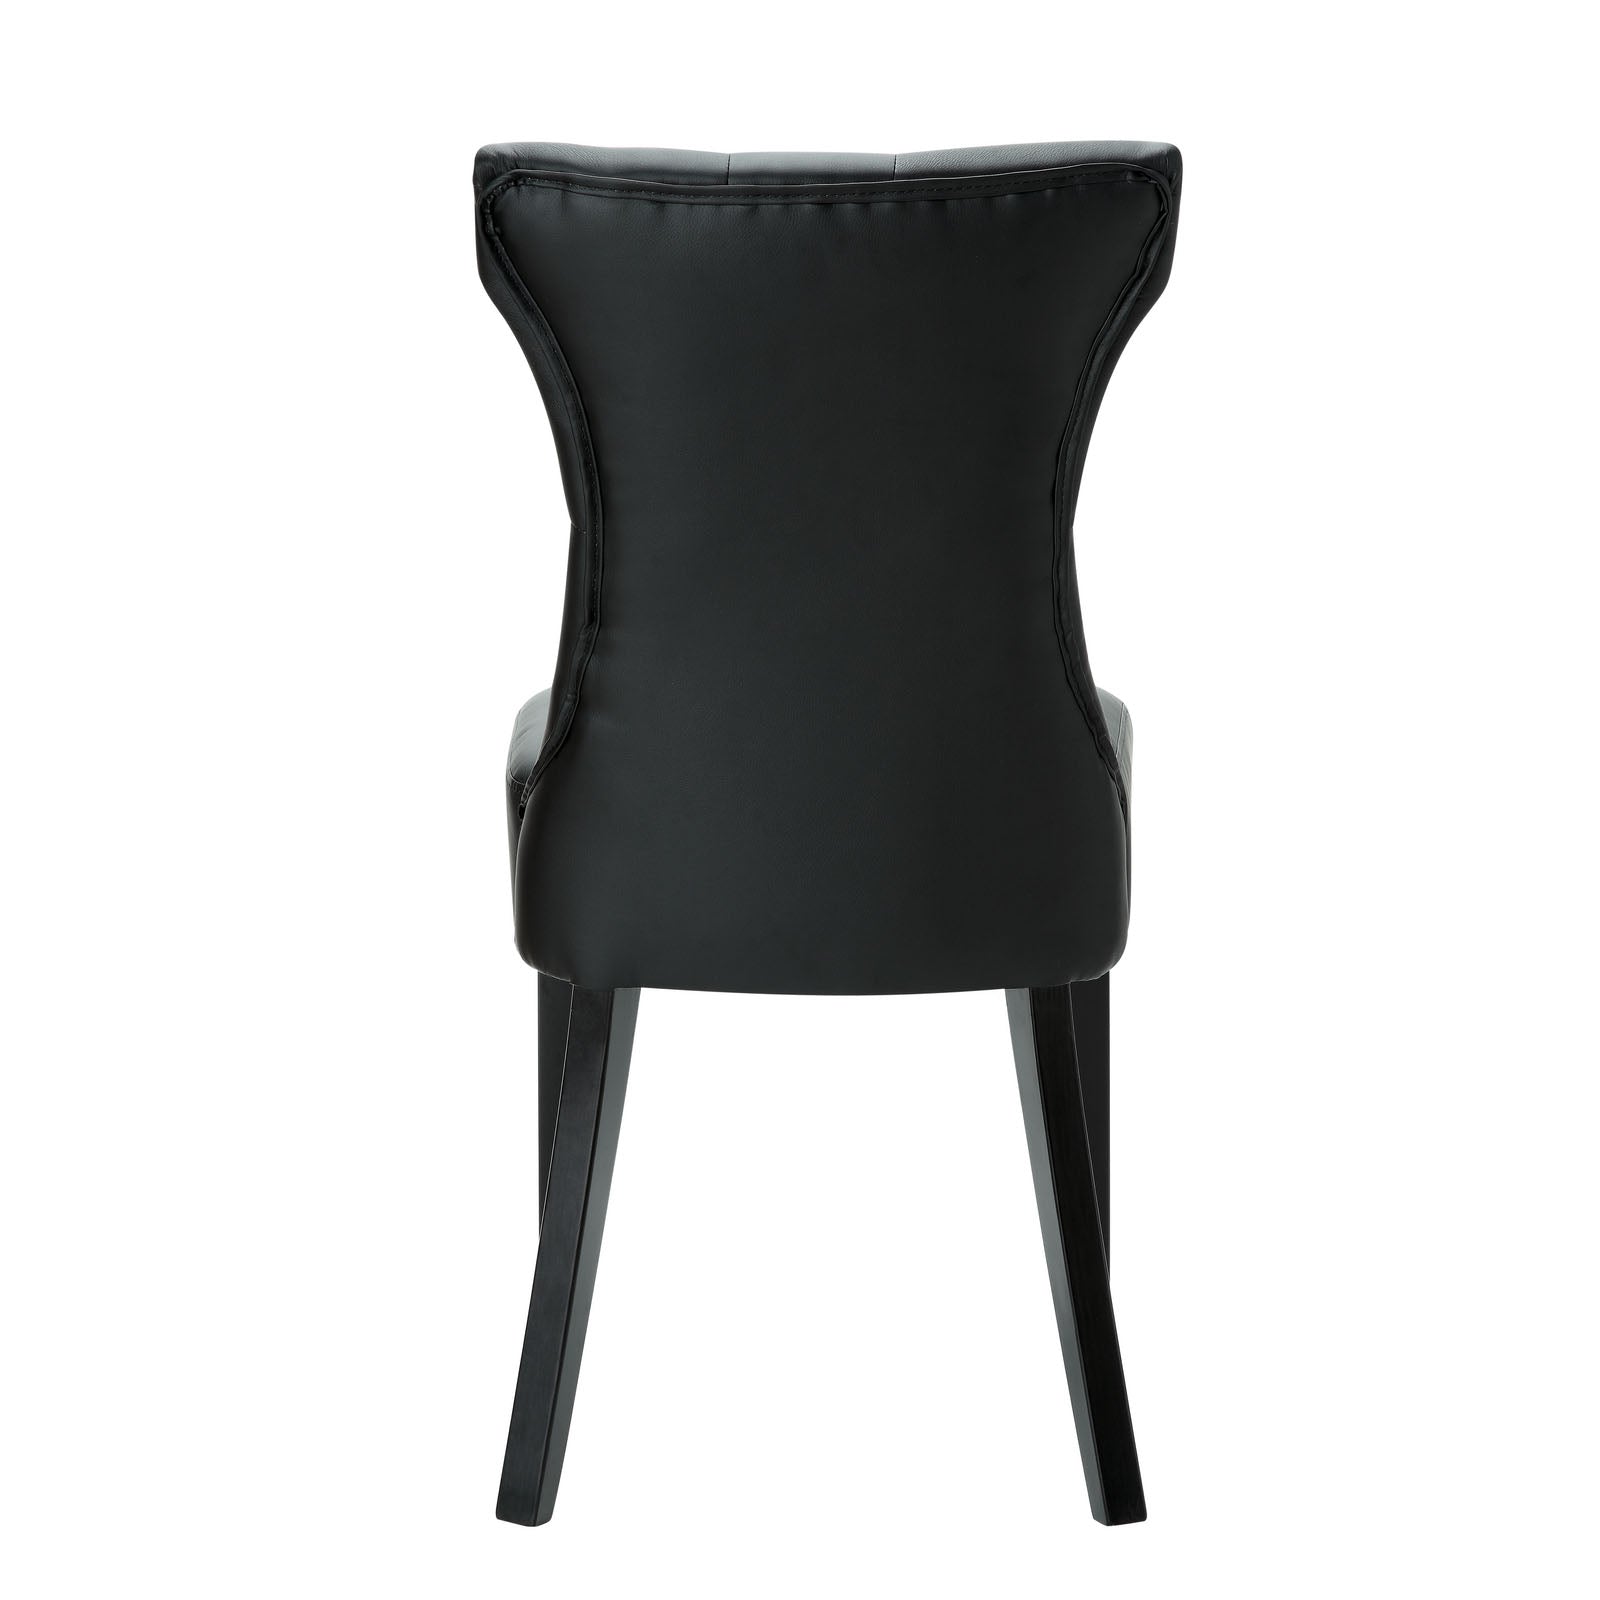 Modway Dining Chairs - Silhouette Dining Chairs ( Set of 2 ) Black